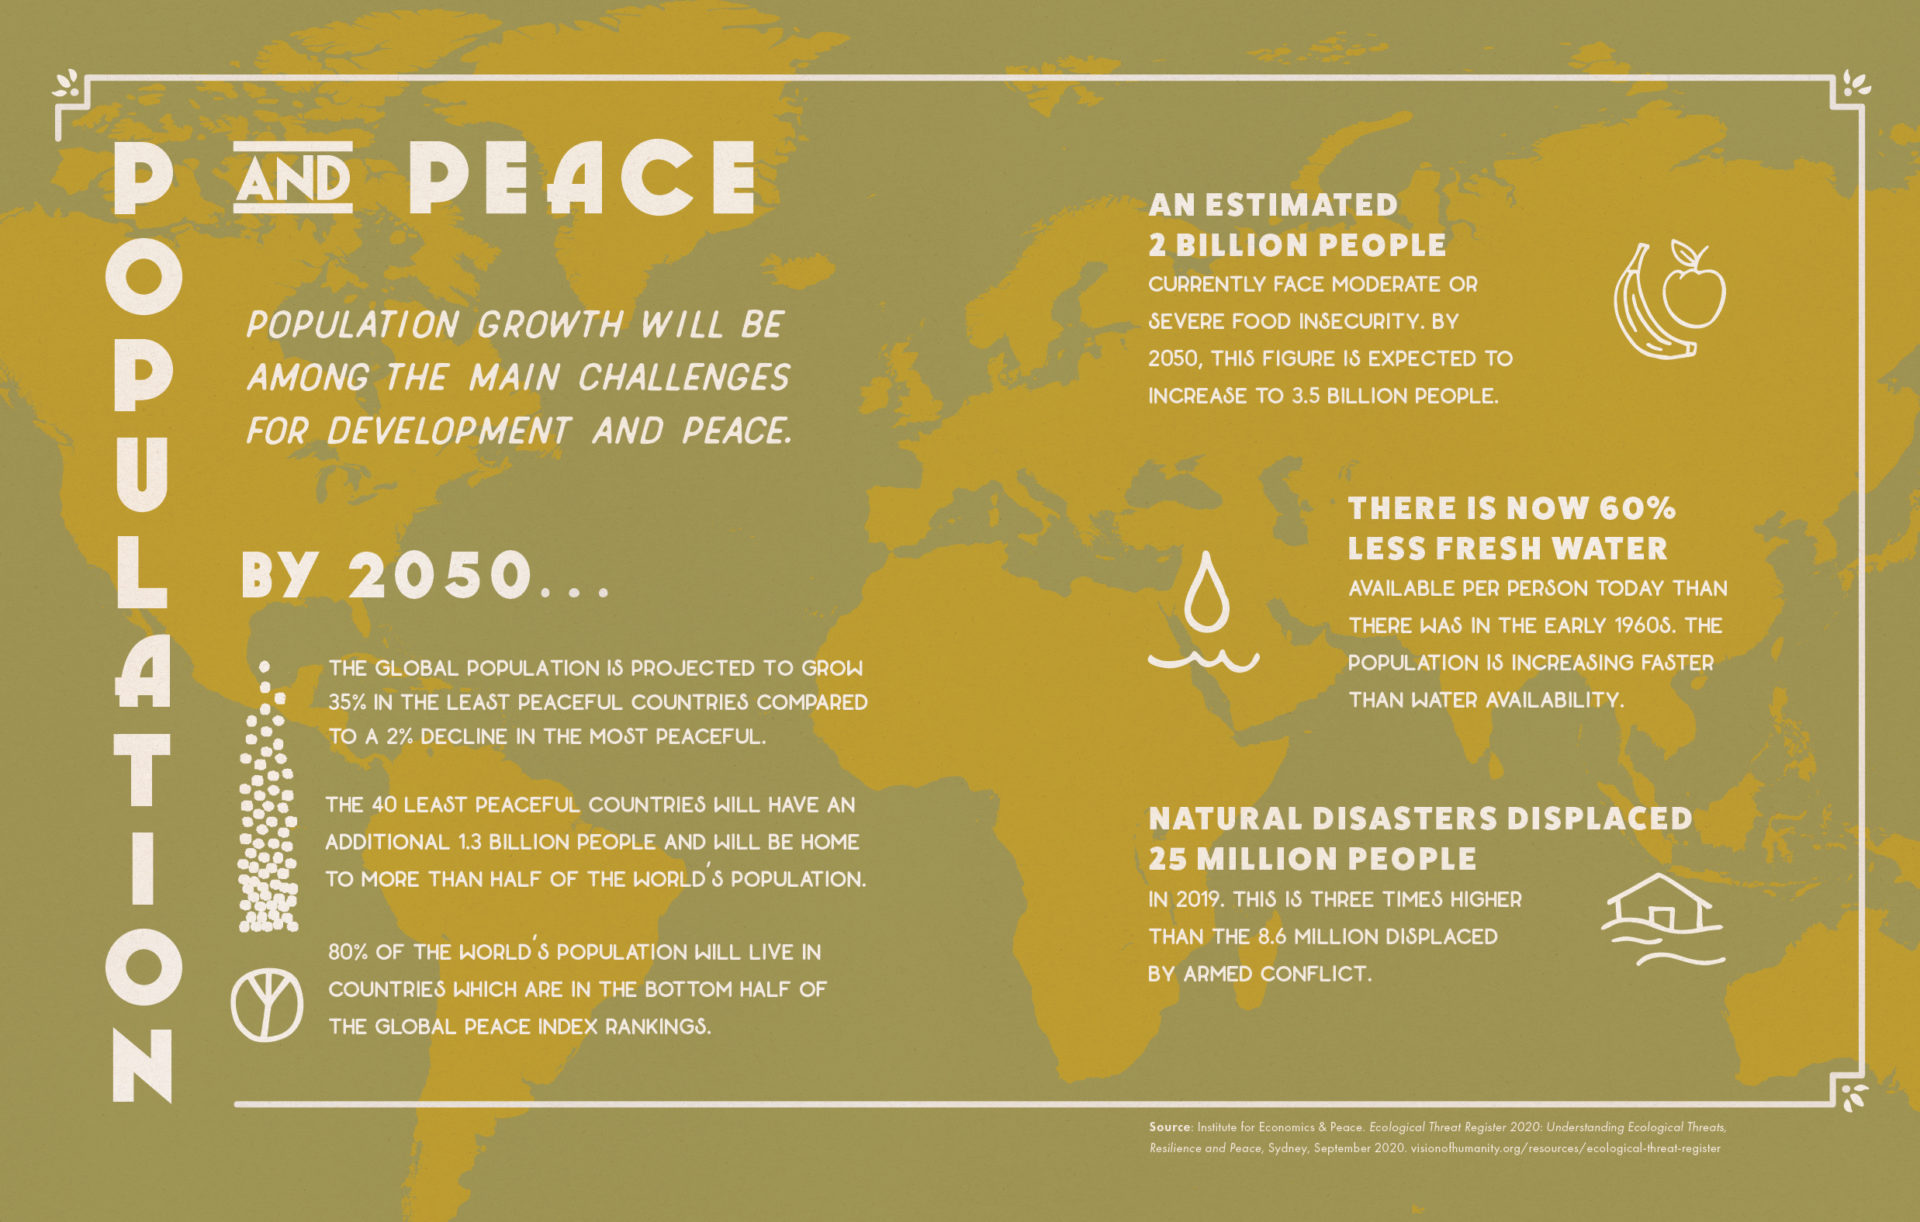 Infographic highlighting topics tied to population and peace. Population growth will be among the main challenges for development and peace. By 2050, the global population is projected to grow 35% in the least peaceful countries compared to a 2% decline in the most peaceful. 80% of the world's population will live in countries which are in the bottom half of the global peace index rankings. An estimated 2 billion people currently face moderate or severe food insecurity. By 2050 this figure is expected to increase to 3.5billion. There is now 60% less fresh water available per person compared to early 60s. Natural disasters displaced 25million people in 2019. This is three times higher than the 8.6 million displaced by armed conflict.